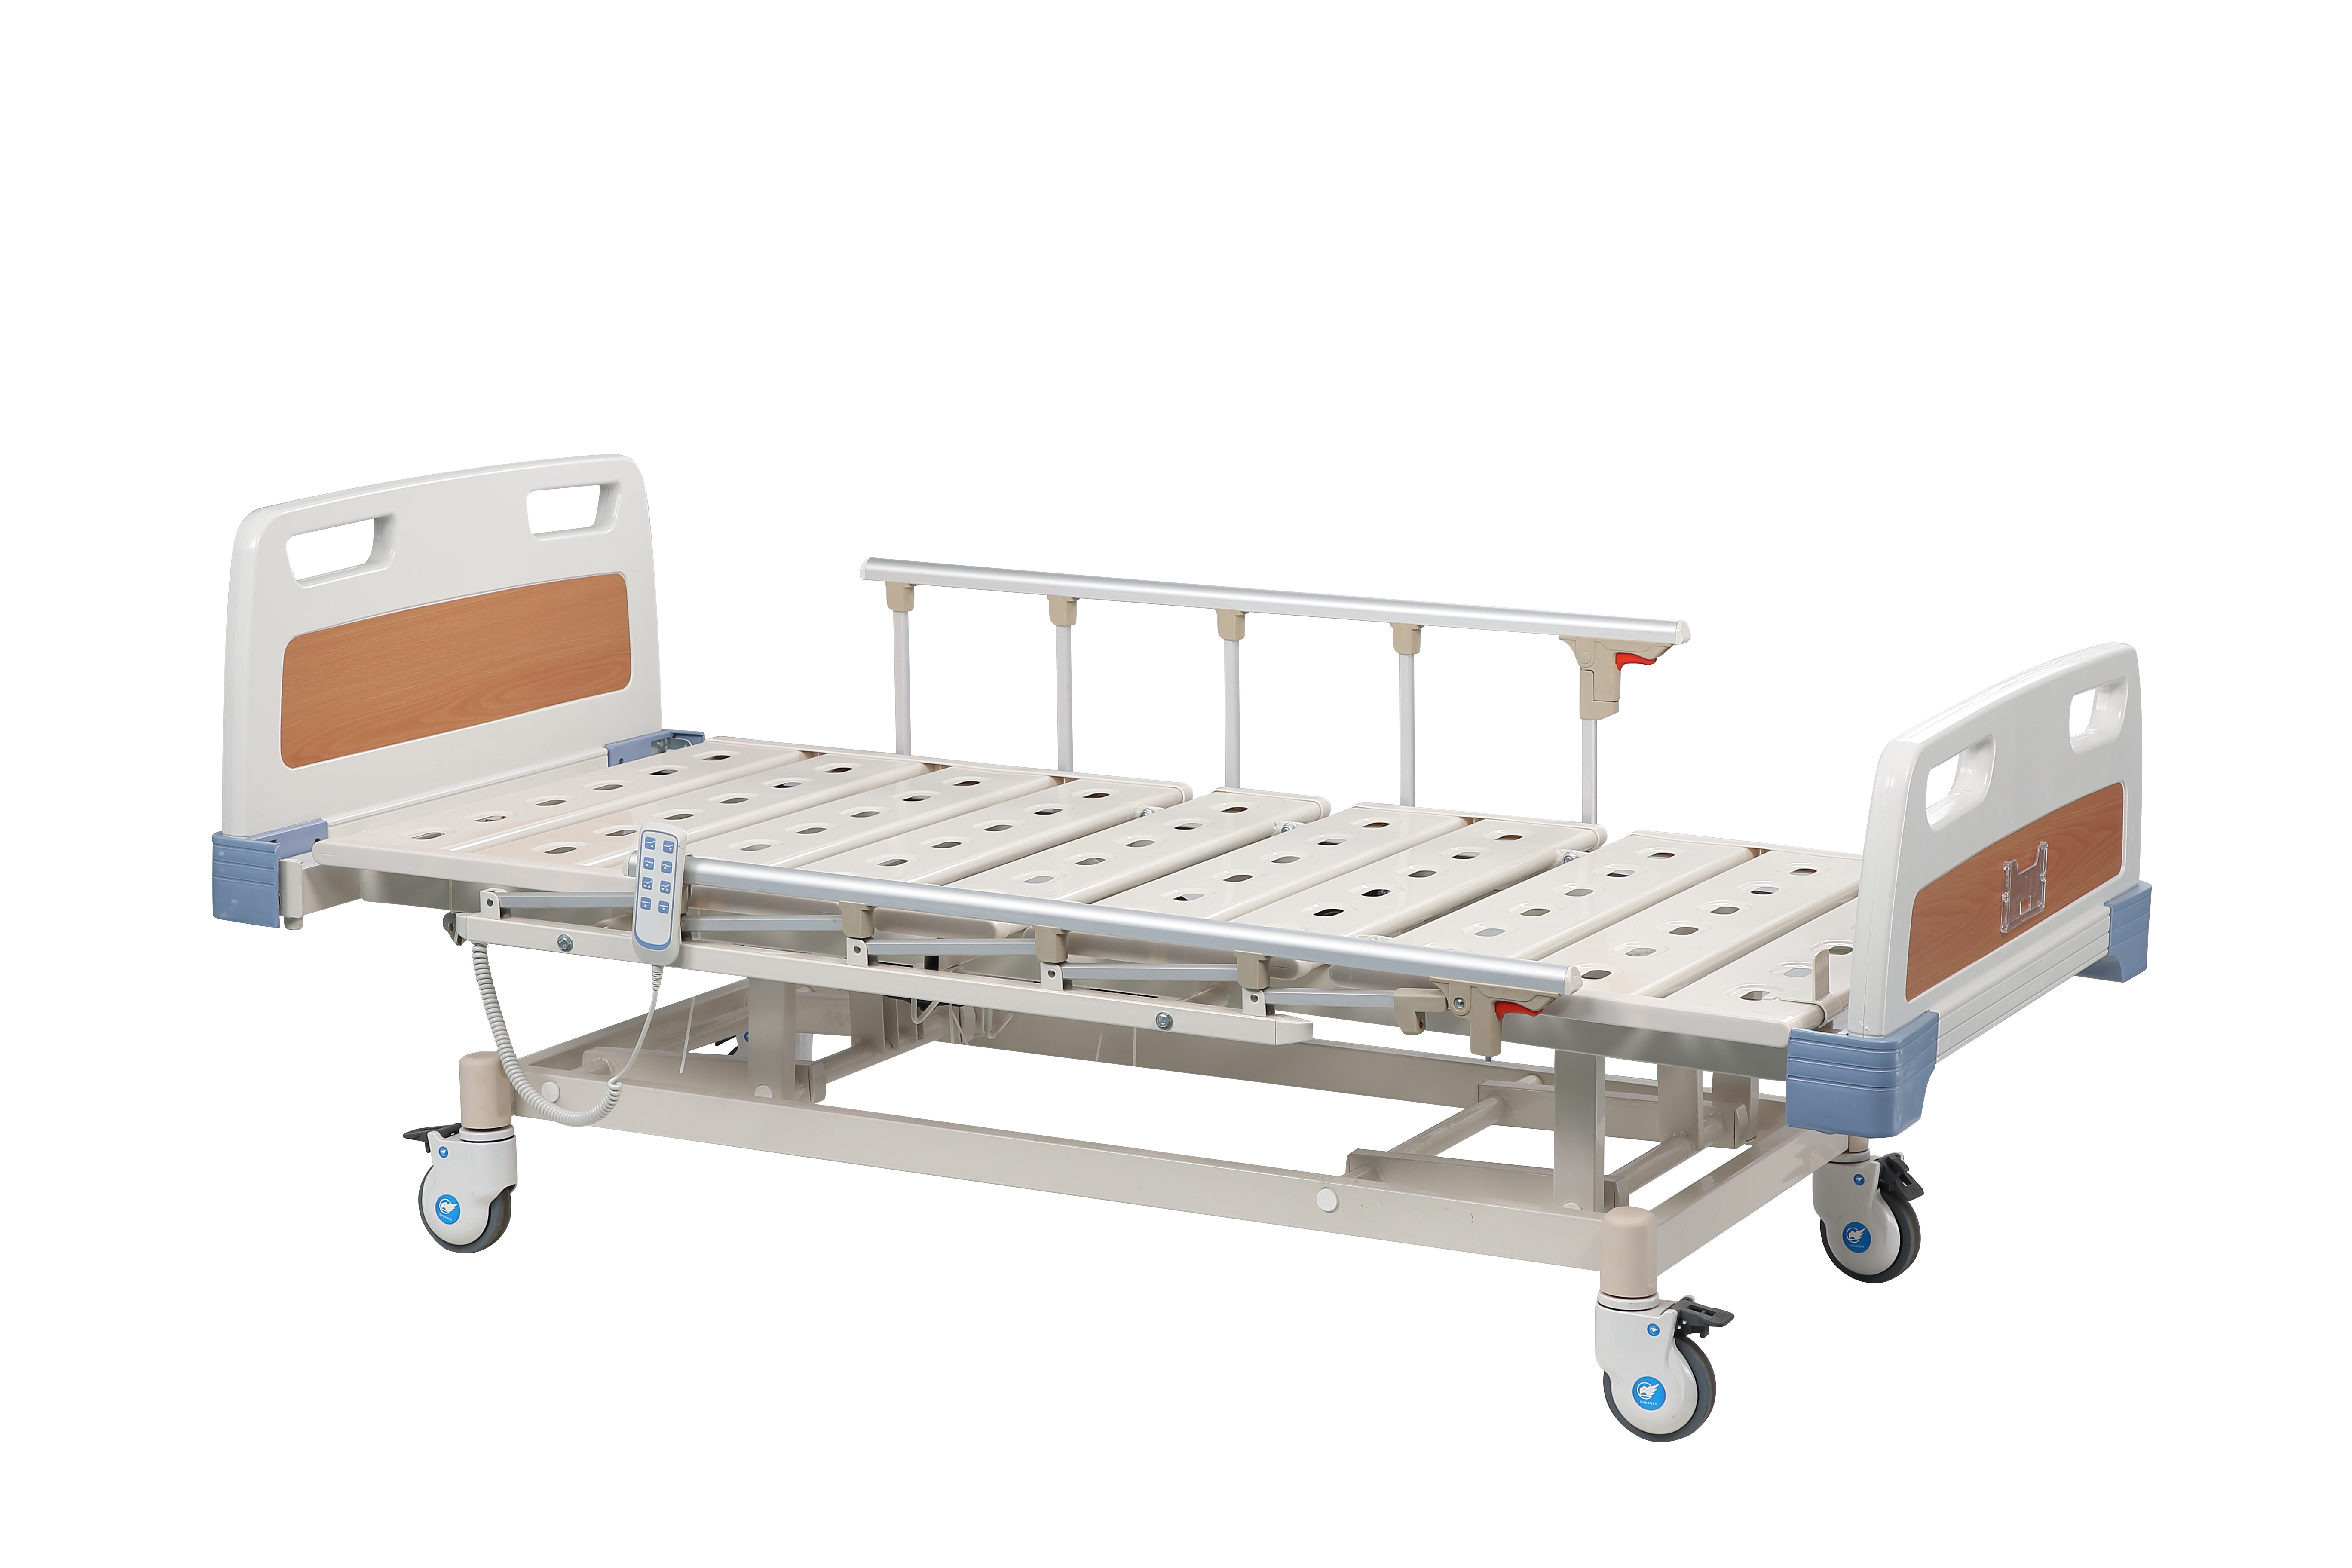  Three Function Manual Hospital Bed OEM With 3 Cranks For ICU With Switch Manufactures